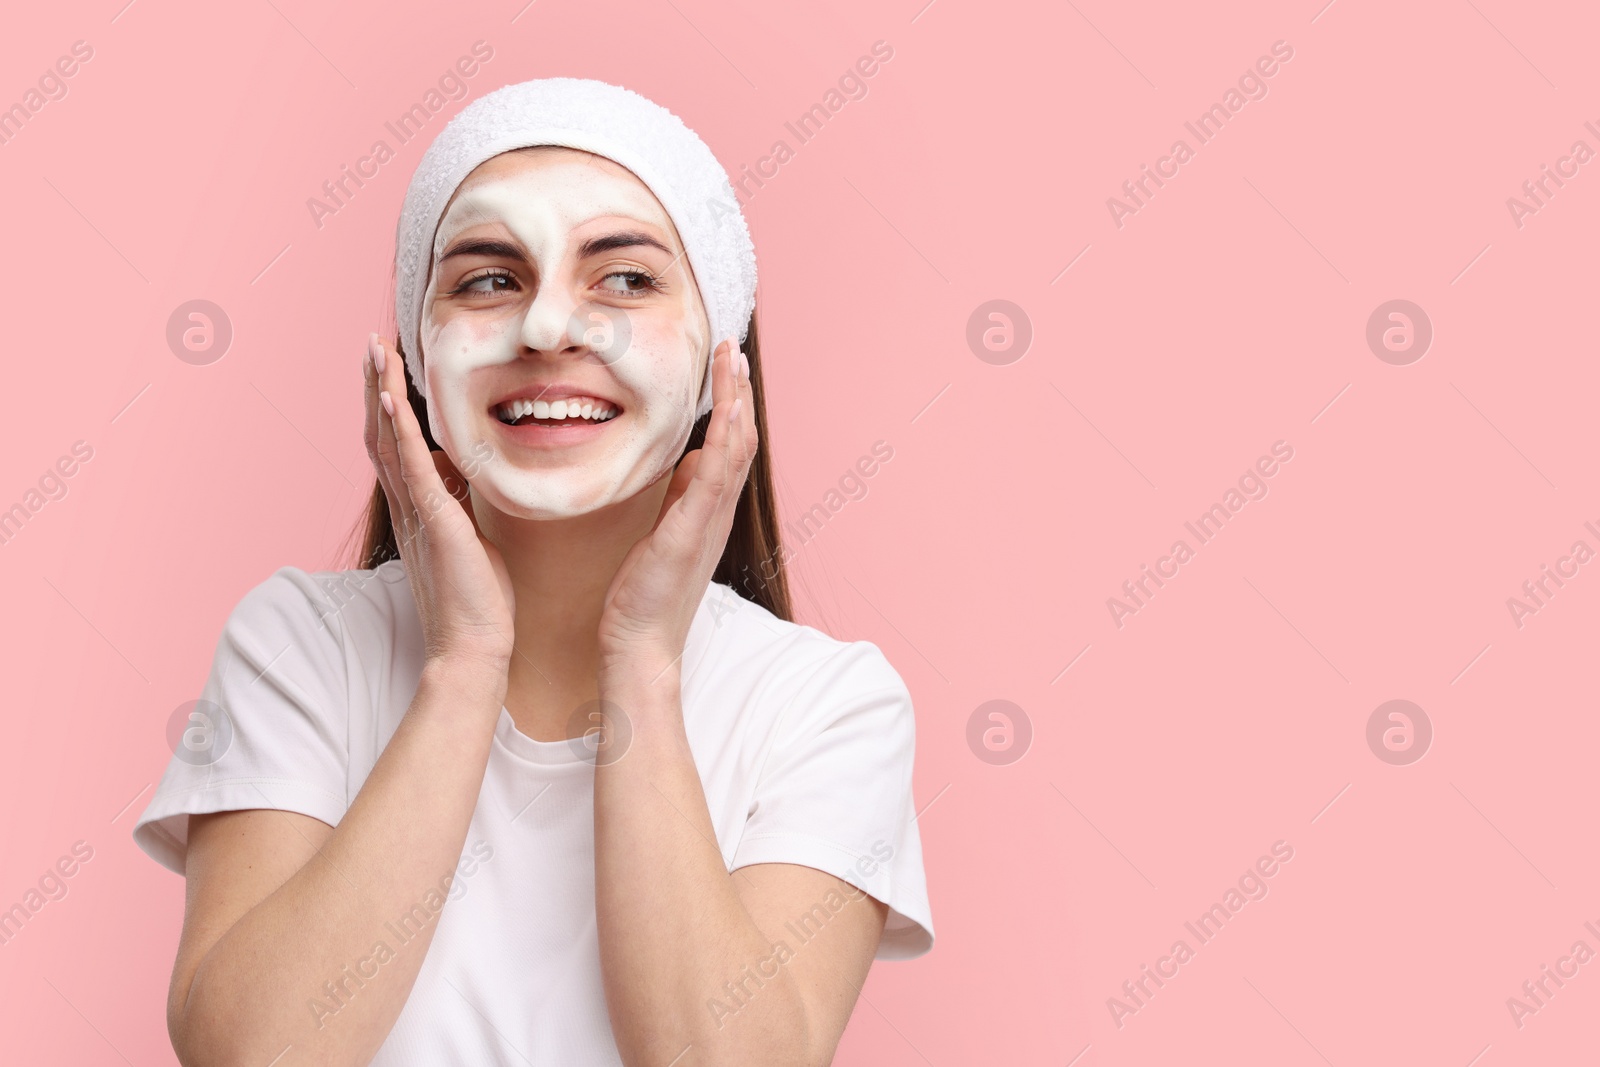 Photo of Young woman with headband washing her face on pink background, space for text